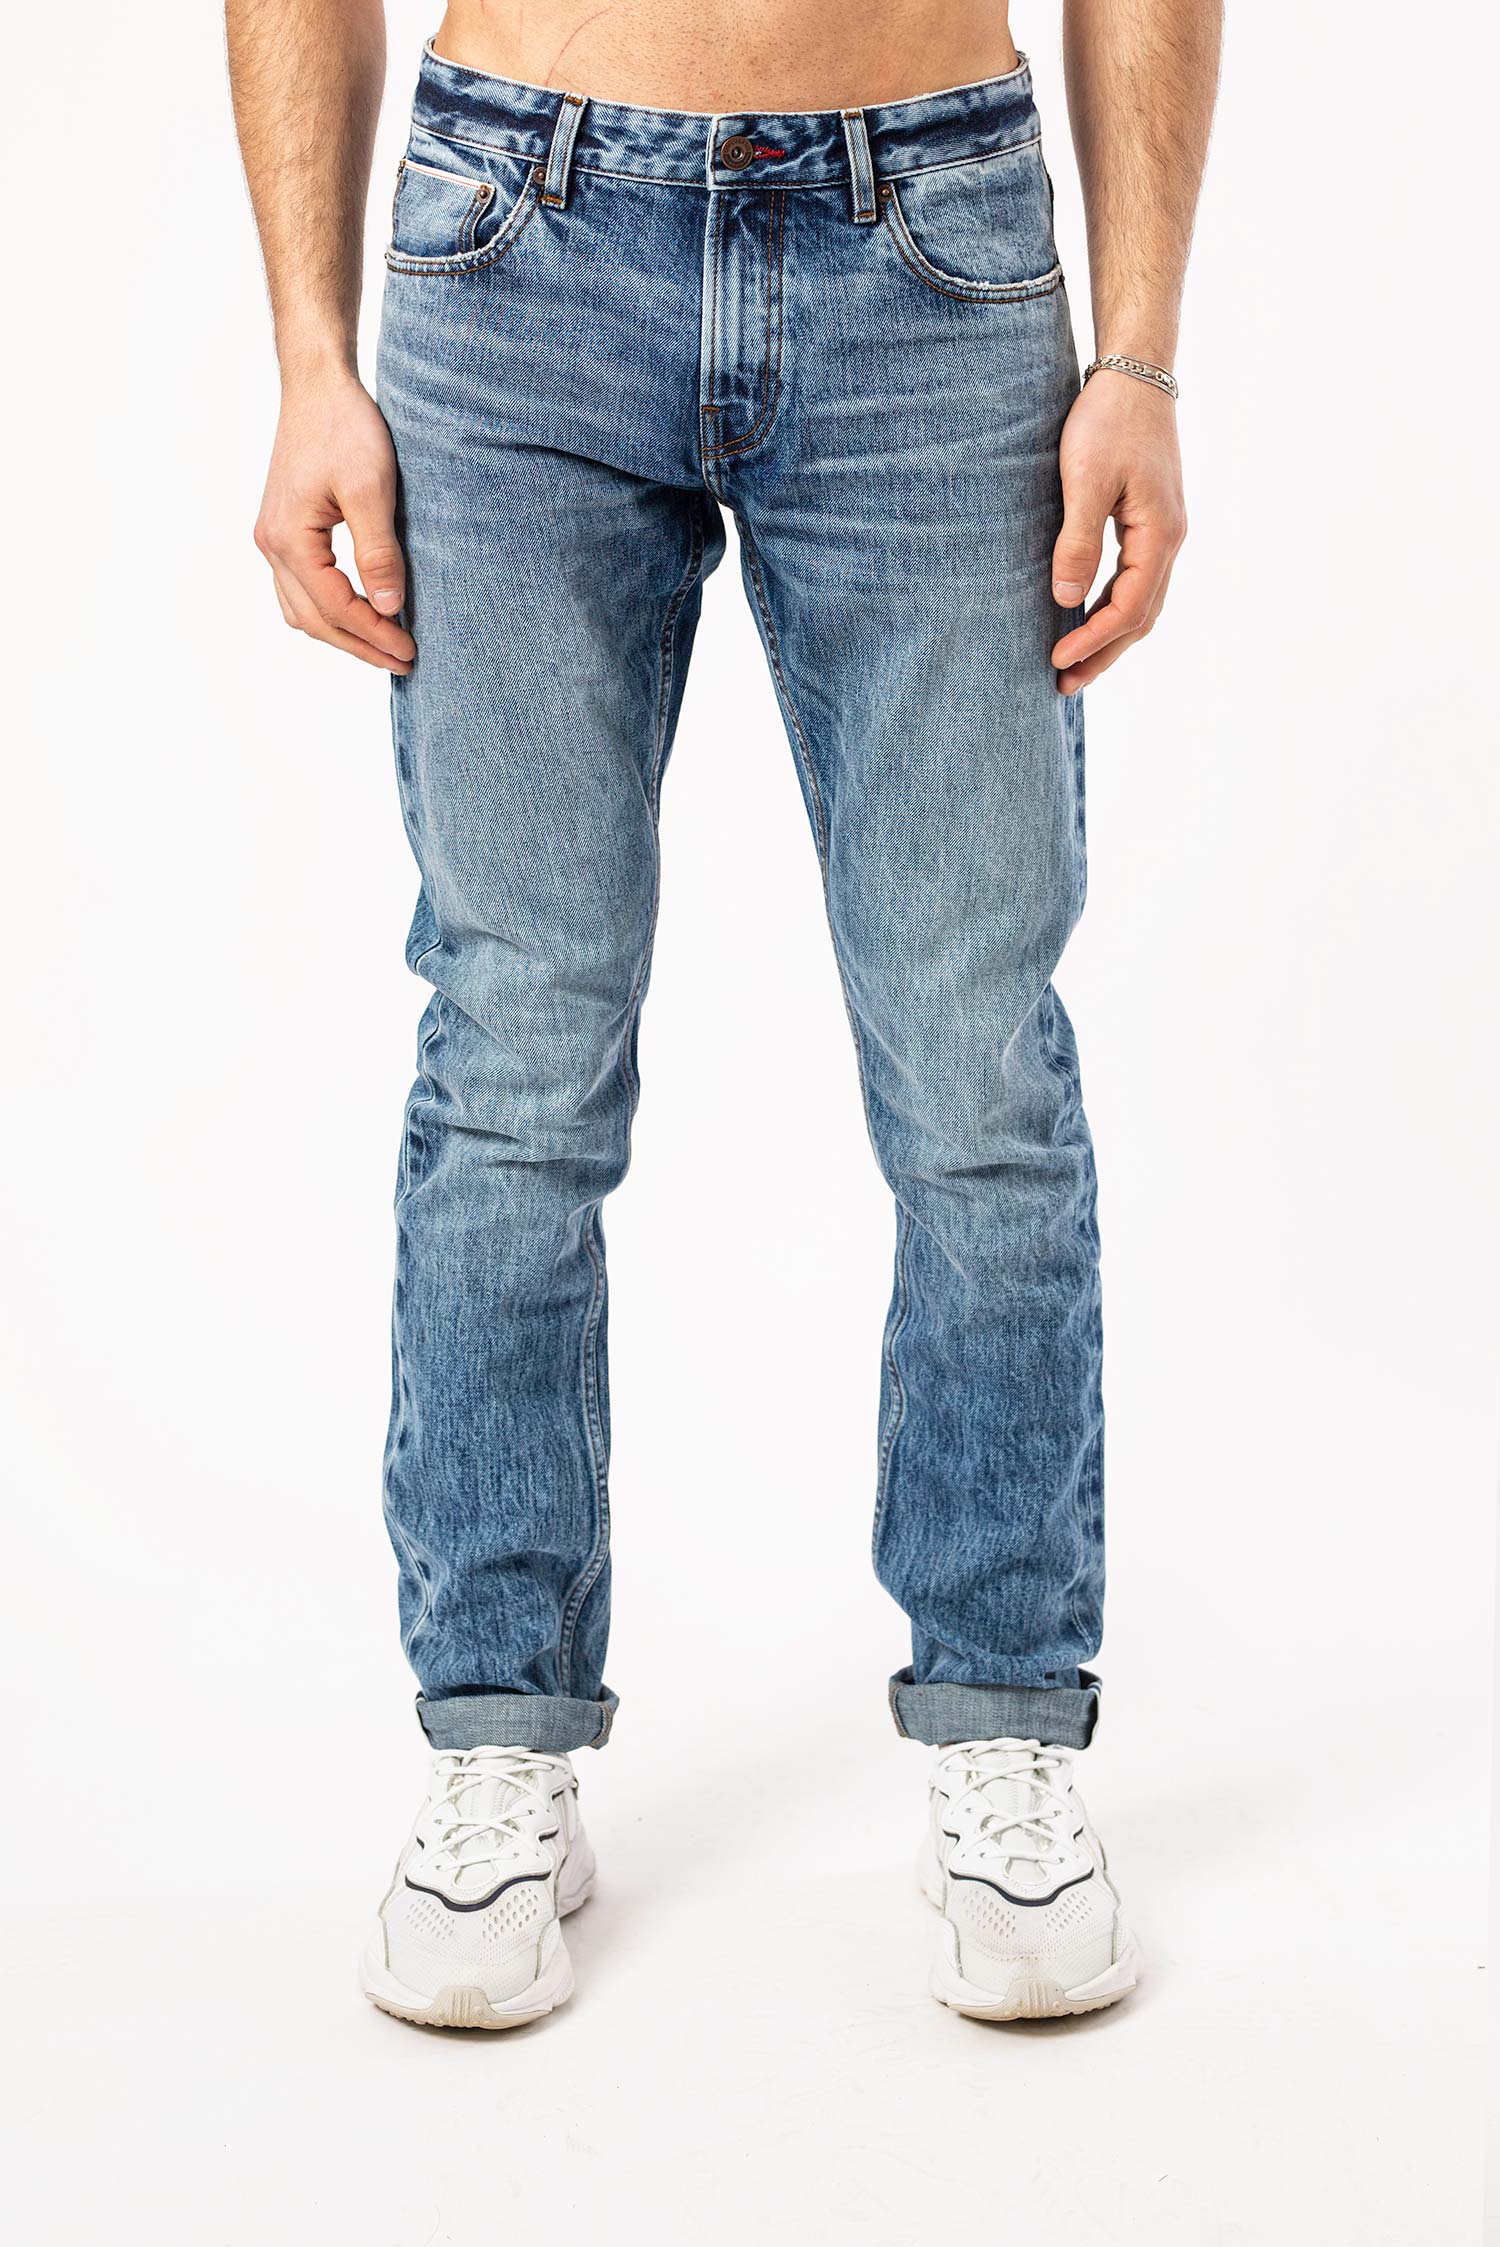 DML MENS Premium slim fit selvedge jeans in a mid wash featuring a zip fly fastening, a regular rise. Crafted using authentic 100% cotton selvedge denim.